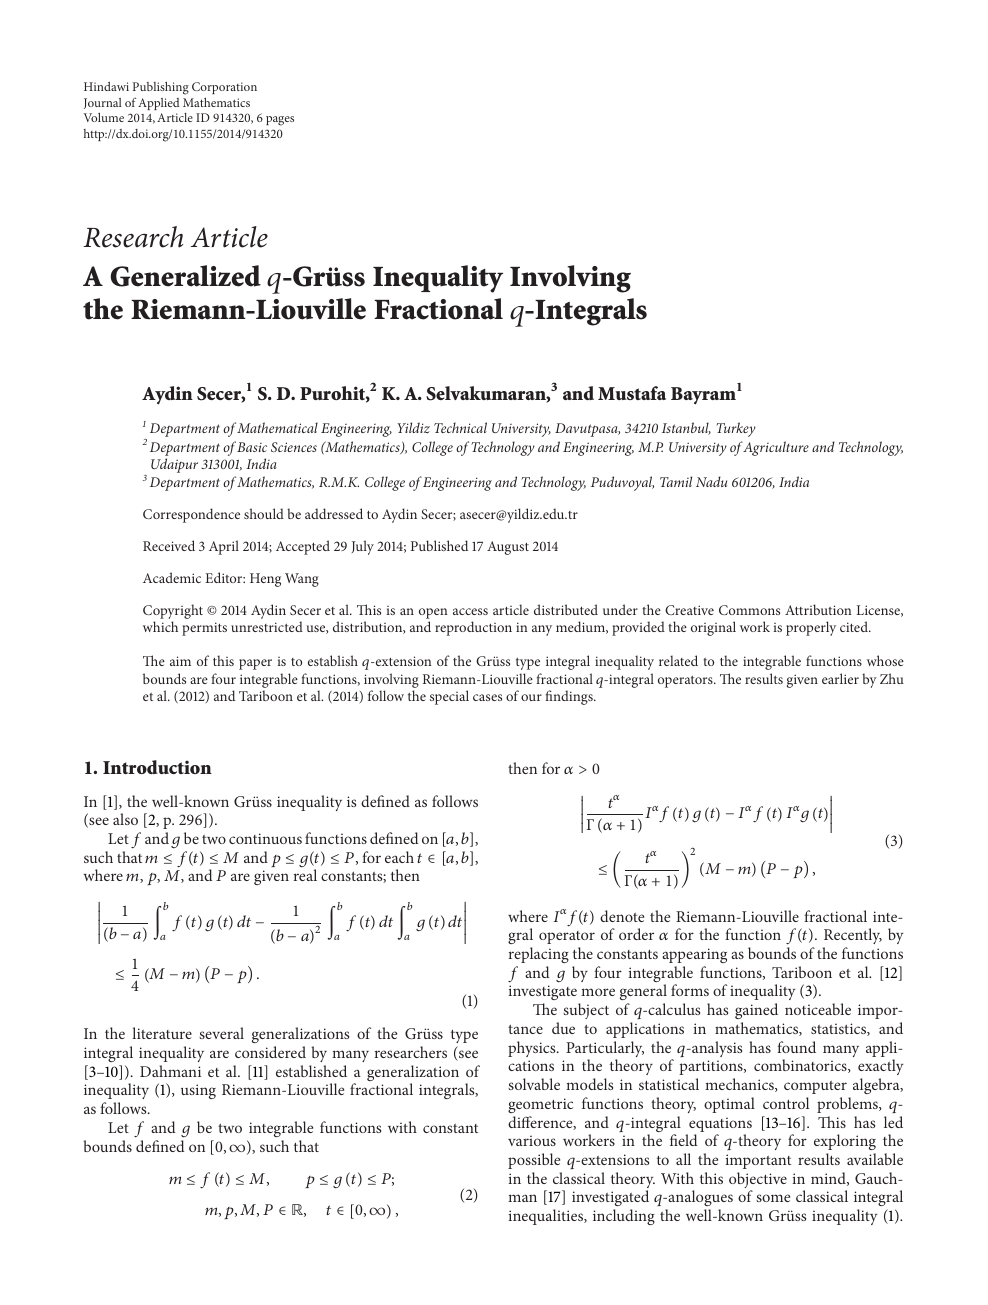 A Generalized Q Gruss Inequality Involving The Riemann Liouville Fractional Q Integrals Topic Of Research Paper In Mathematics Download Scholarly Article Pdf And Read For Free On Cyberleninka Open Science Hub